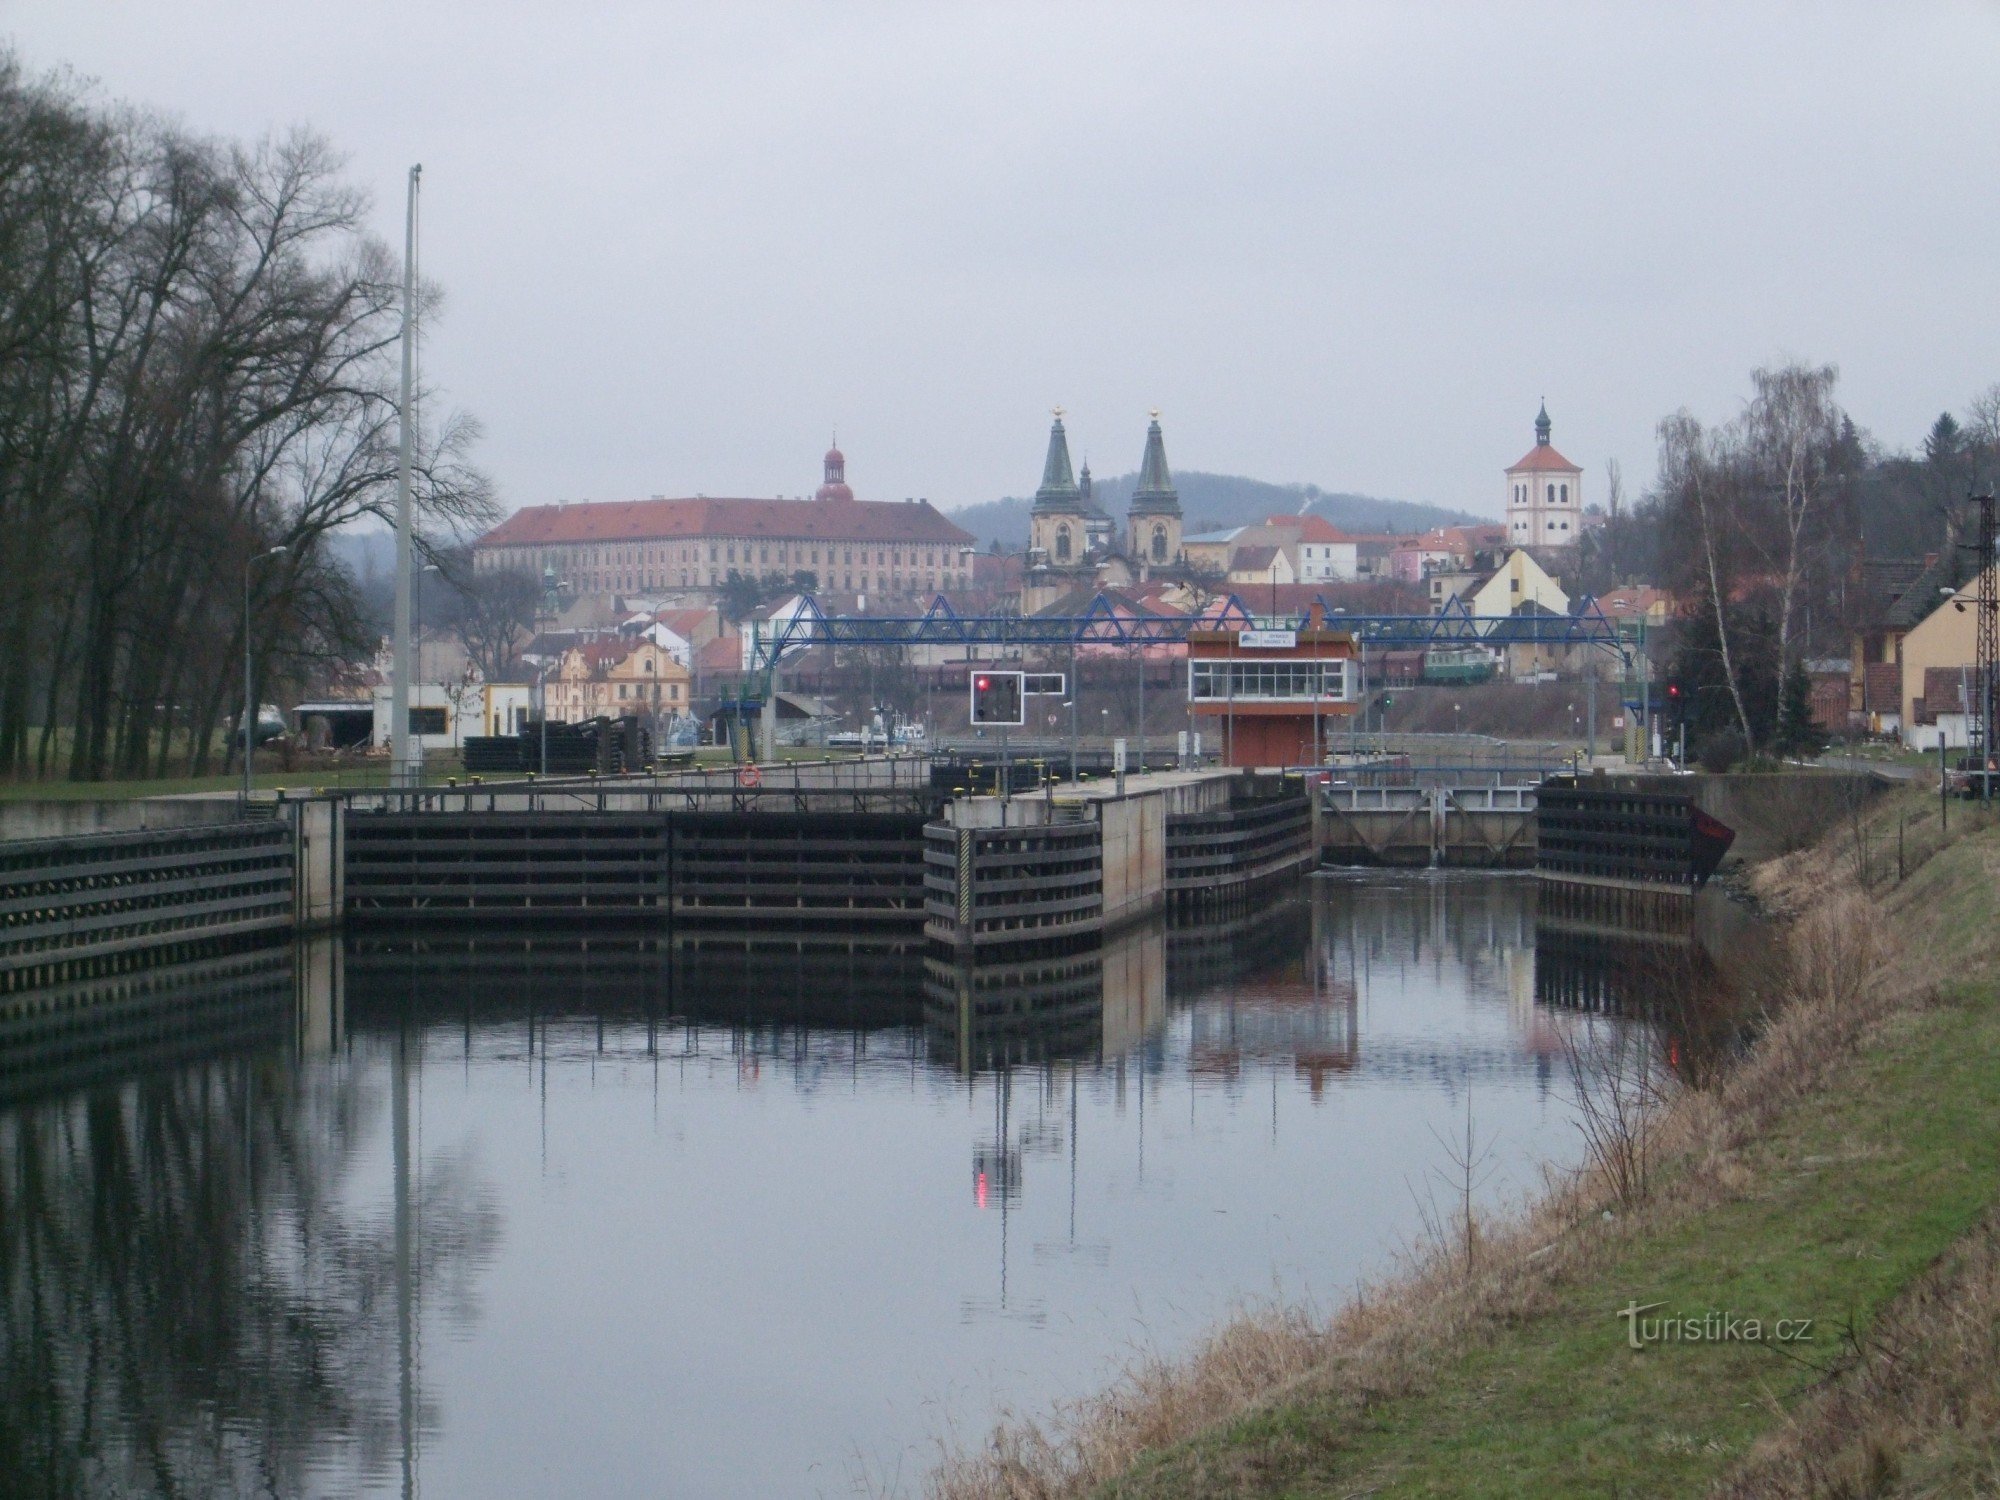 Roudnice nad Labem - view through the locks